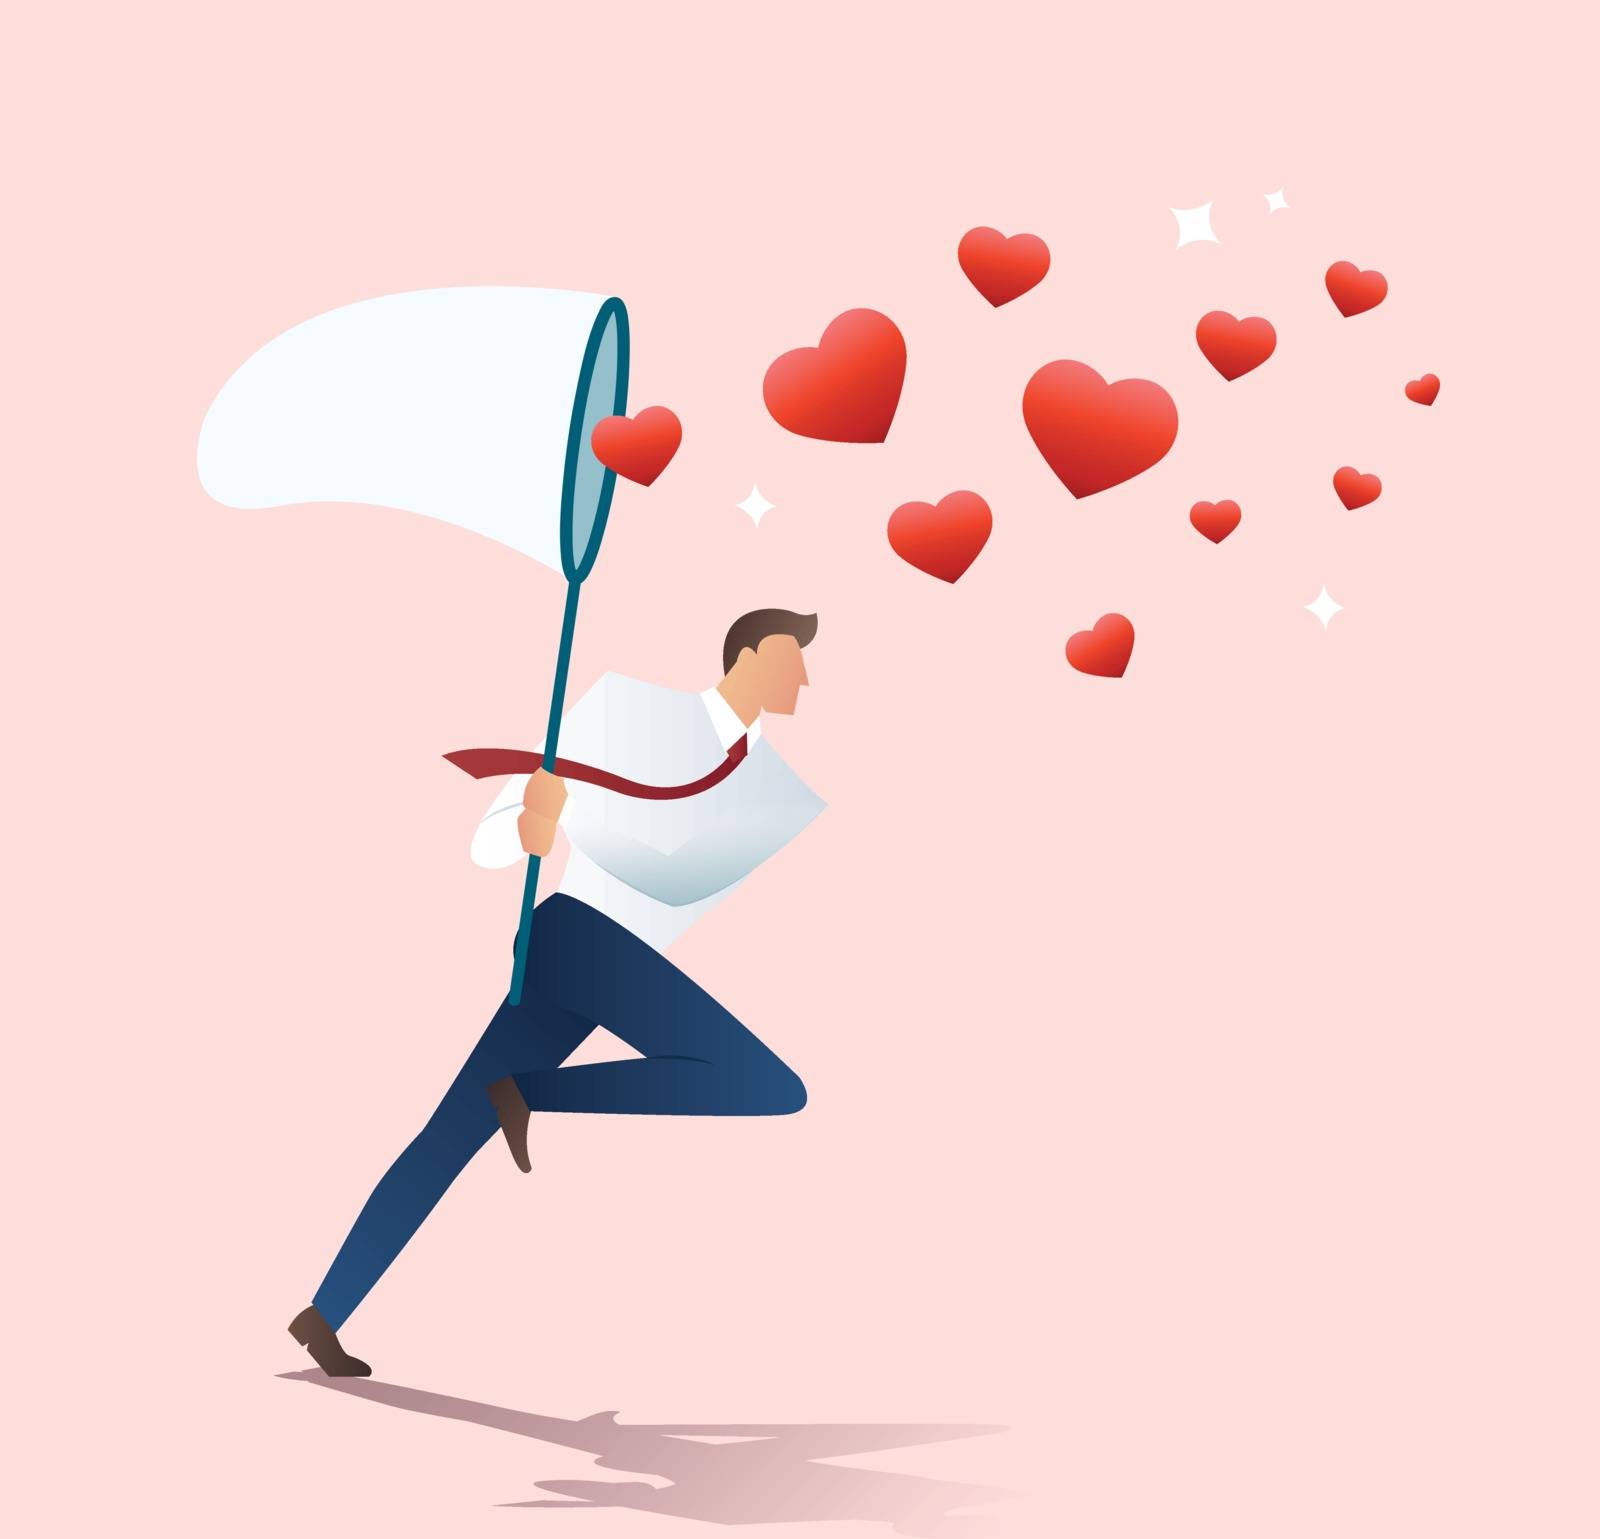 man holding a butterfly net trying to catch heart icons vector illustration by h-santima